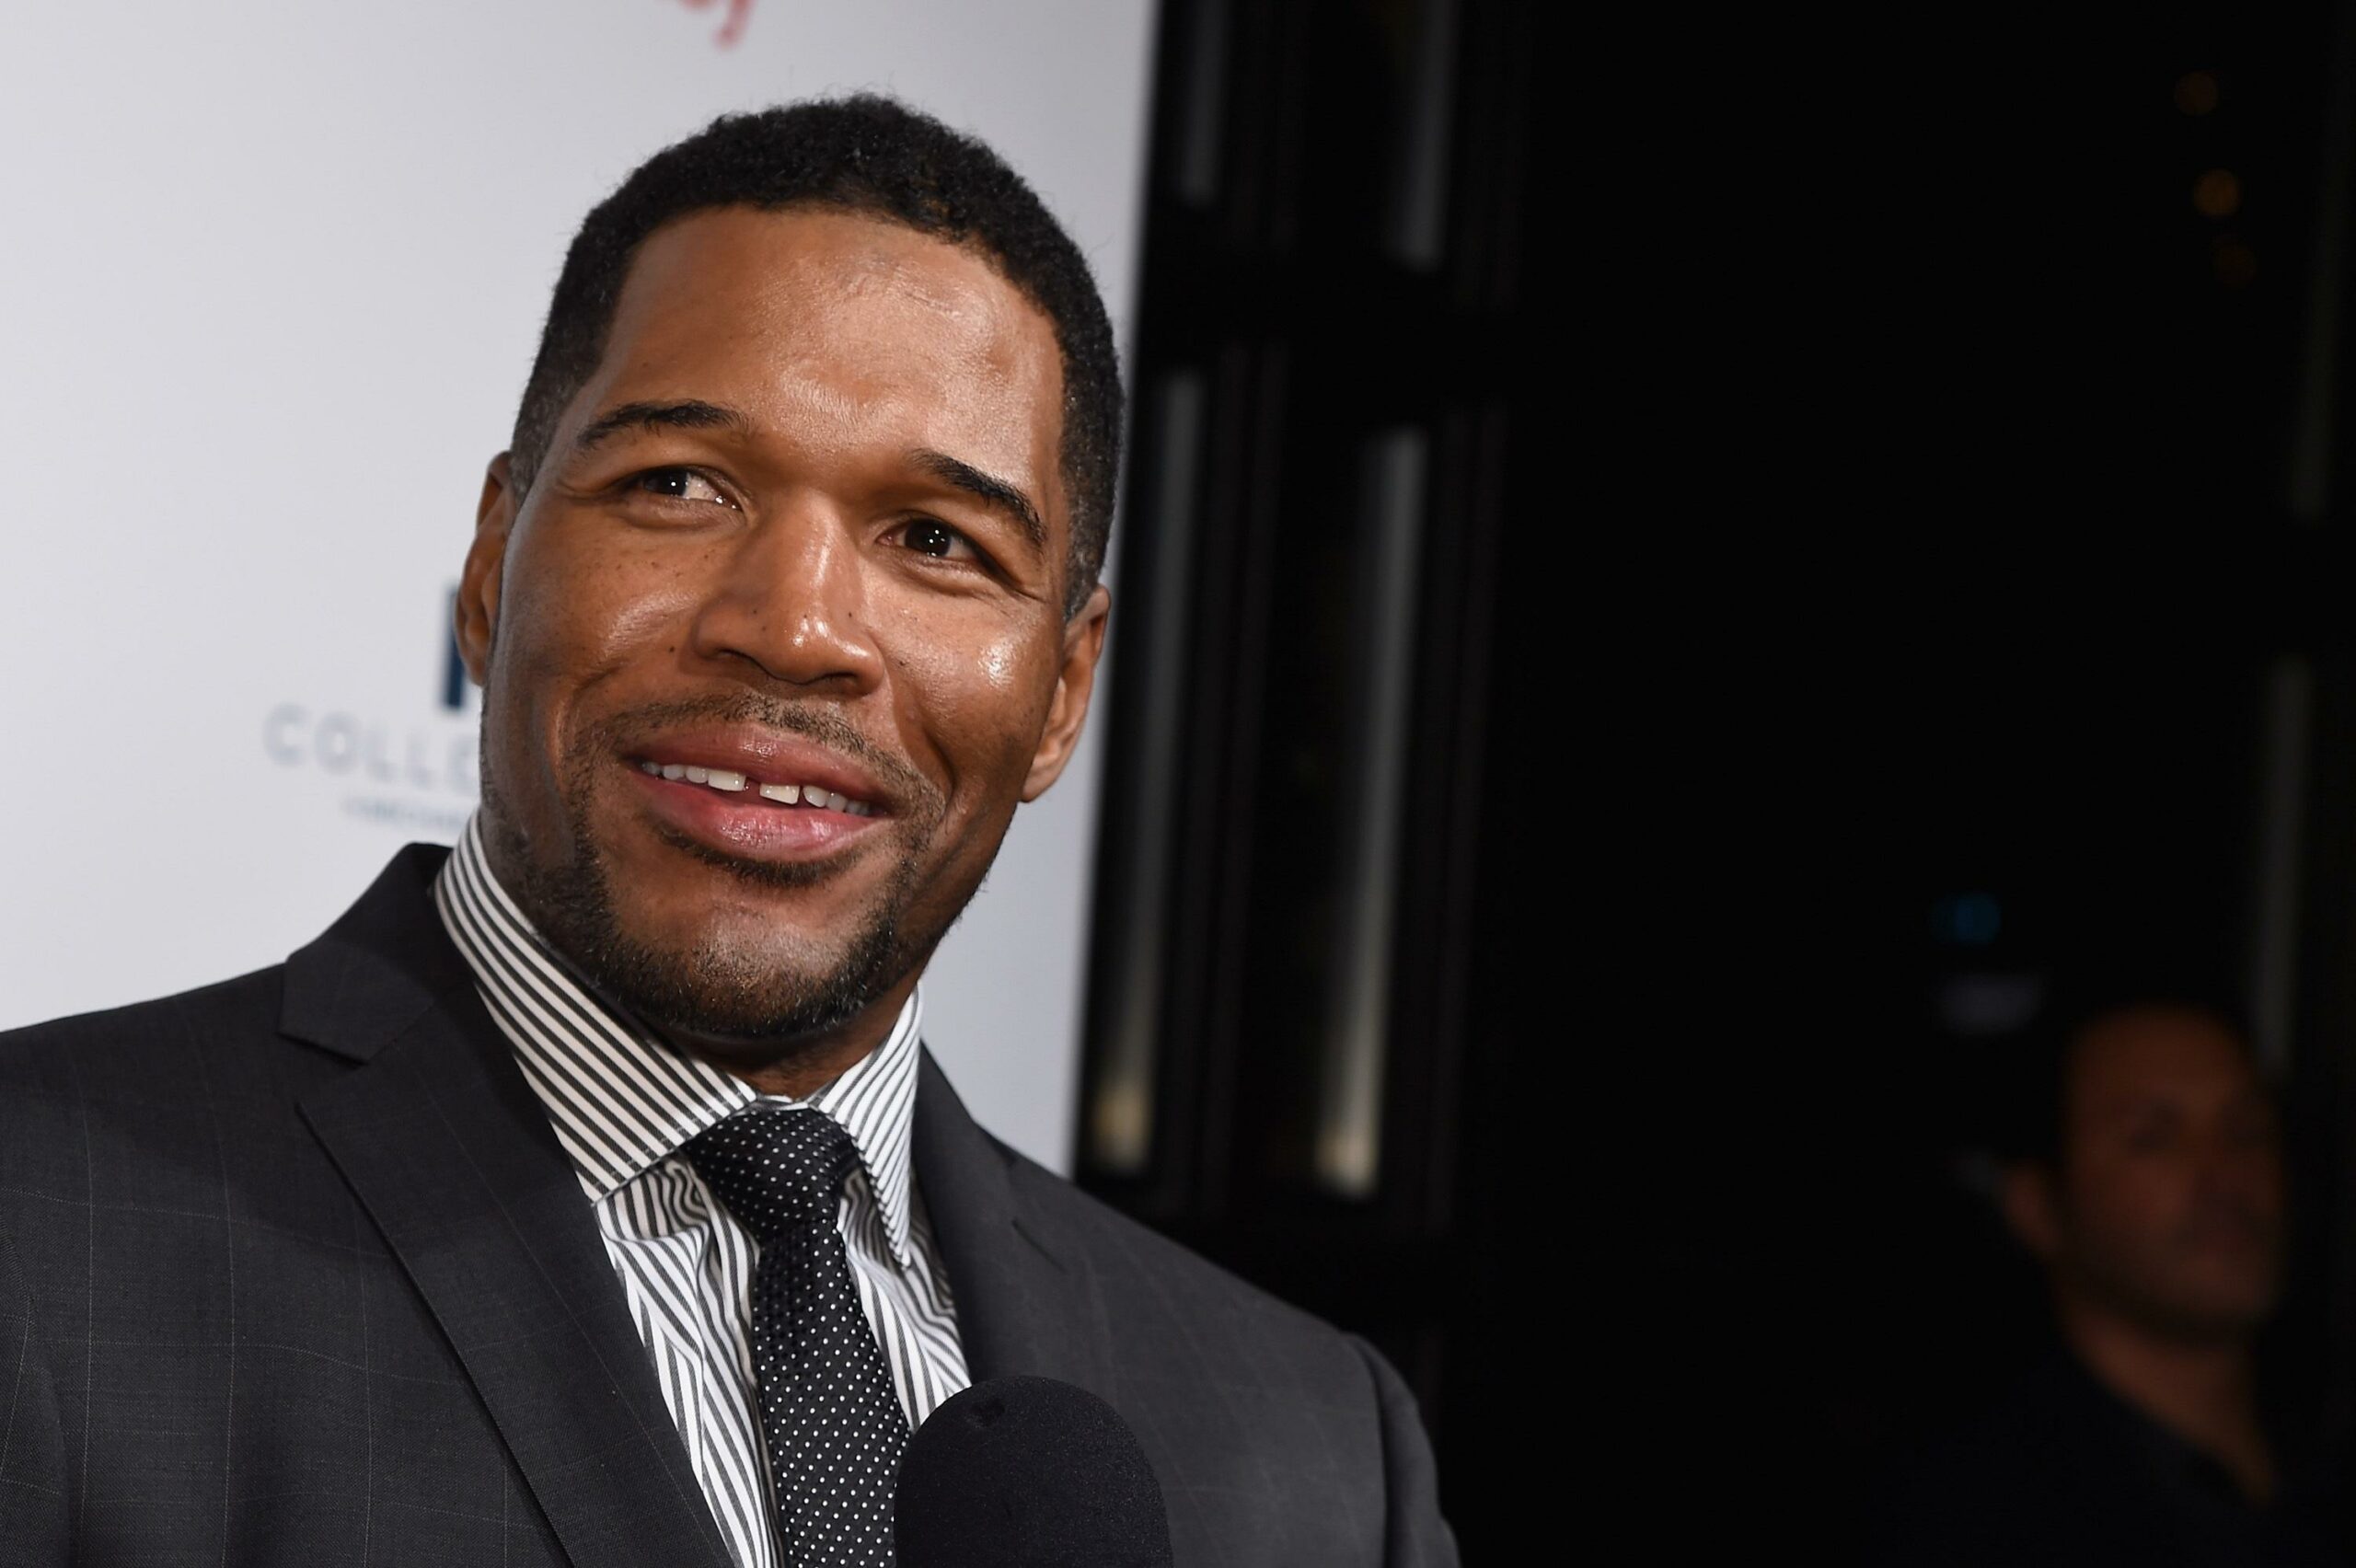 What is the annual salary of Michael Strahan?